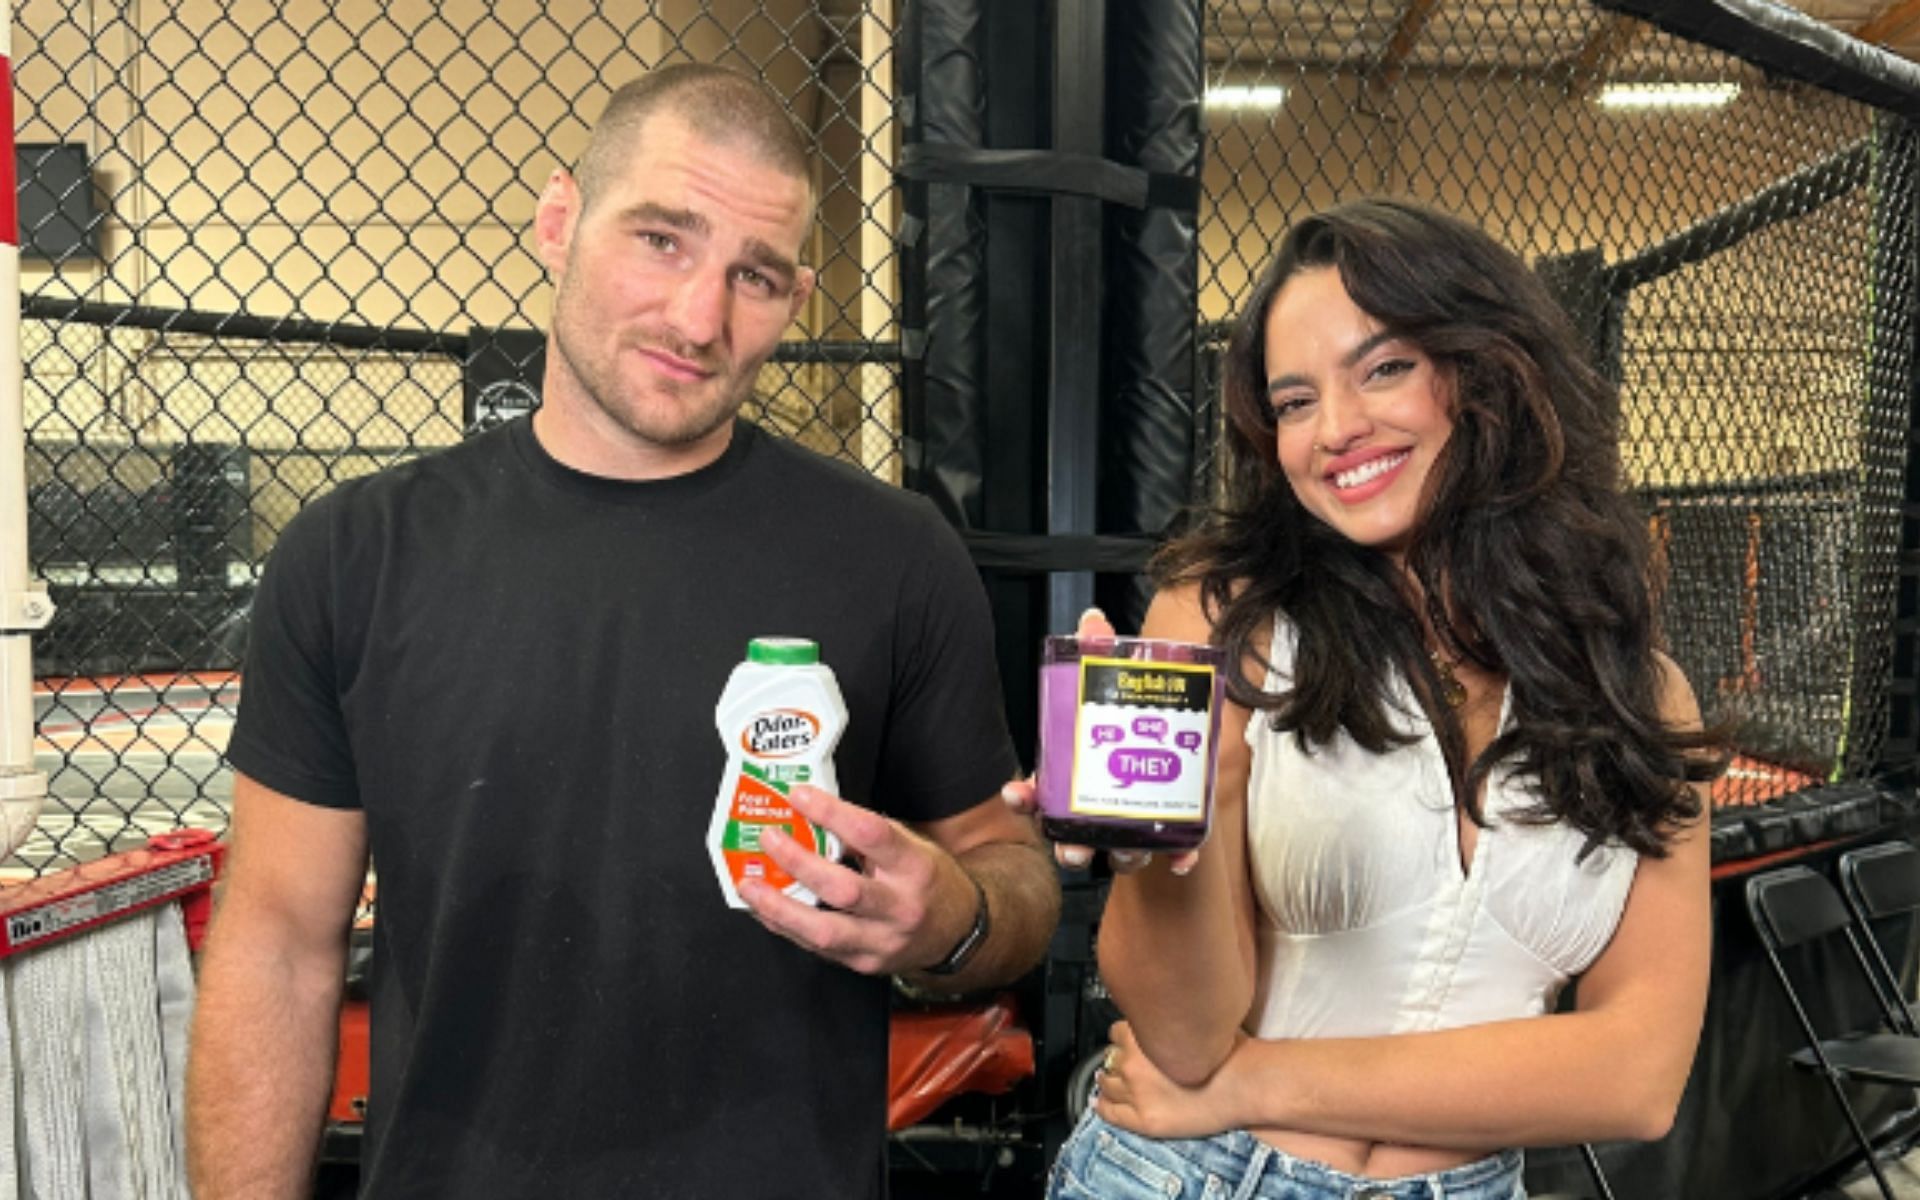 UFC middleweight fighter Sean Strickland on the left and comedian and social media influencer Nina-Marie Daniele on the right [Image Source: @ninamdrama on Twitter]